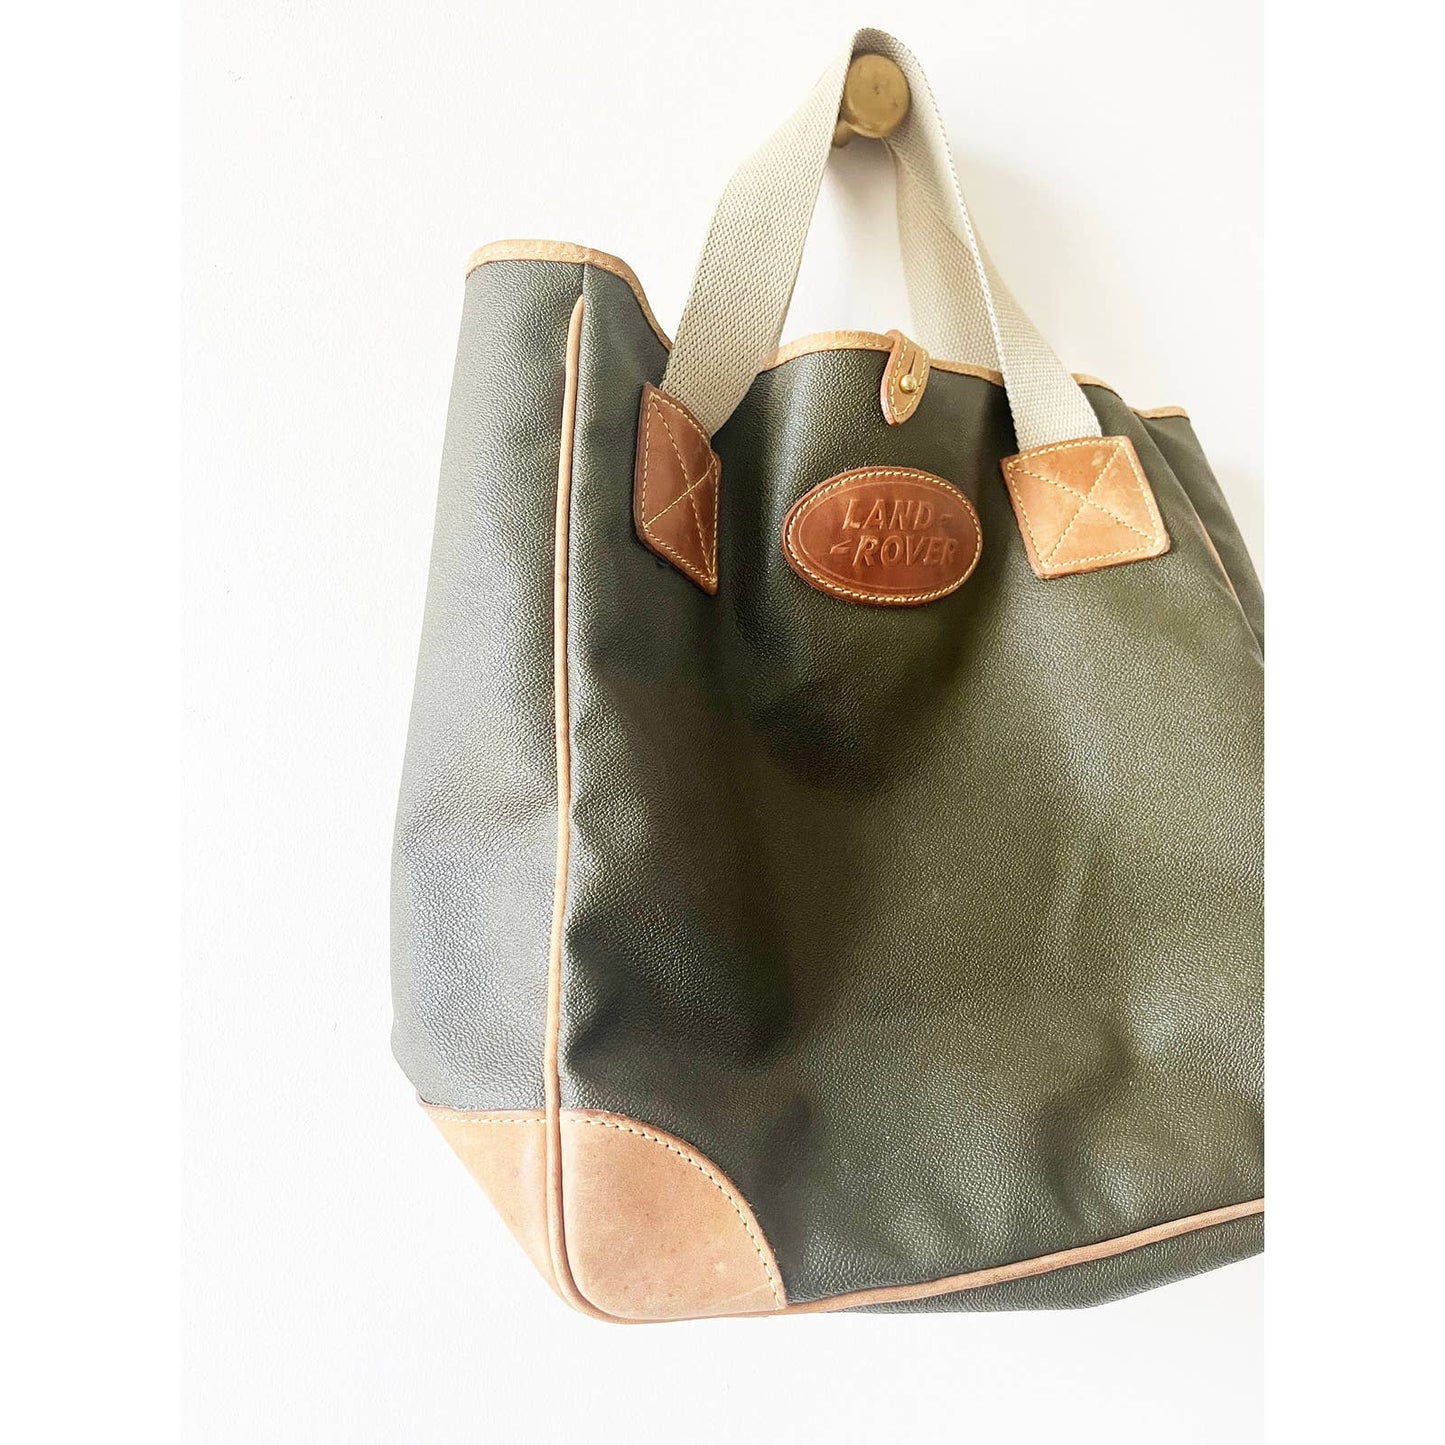 Vintage Land Rover Canvas and Leather Tote Bag